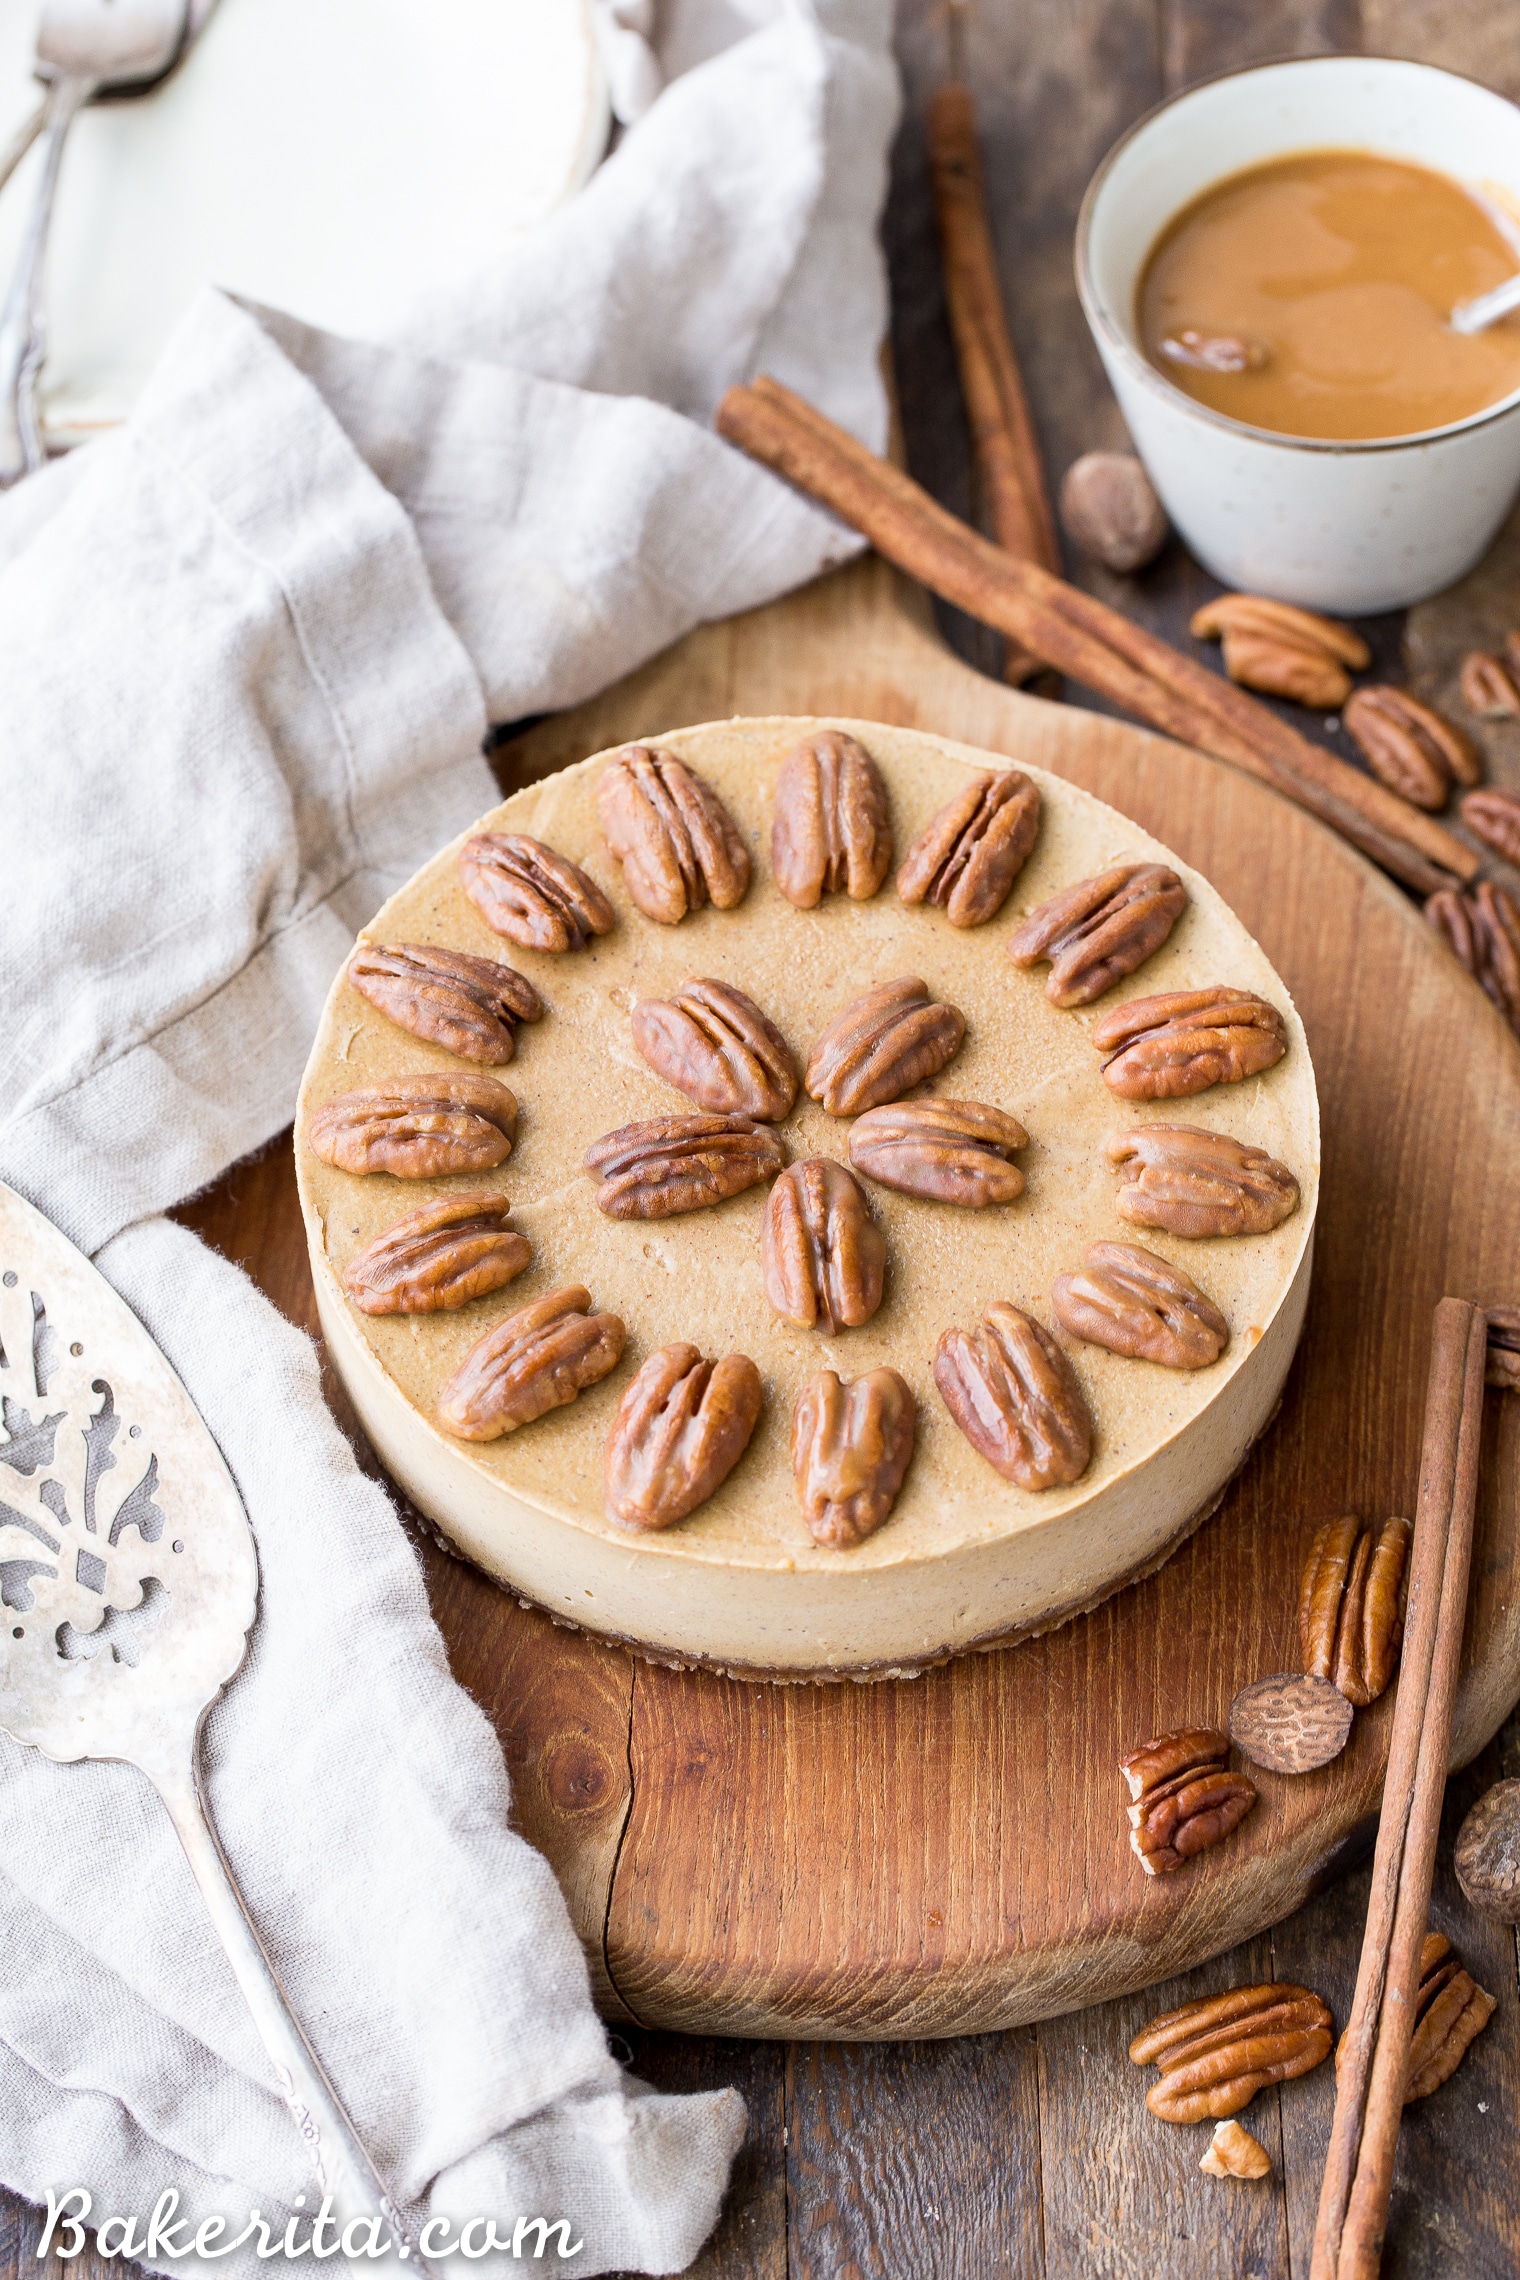 This No Bake Pumpkin Cheesecake is super creamy with a pecan crust and a spiced pumpkin cheesecake filling that's made with cashews! This healthier pumpkin cheesecake is gluten-free, dairy-free, paleo + vegan, and absolutely perfect for the holidays.